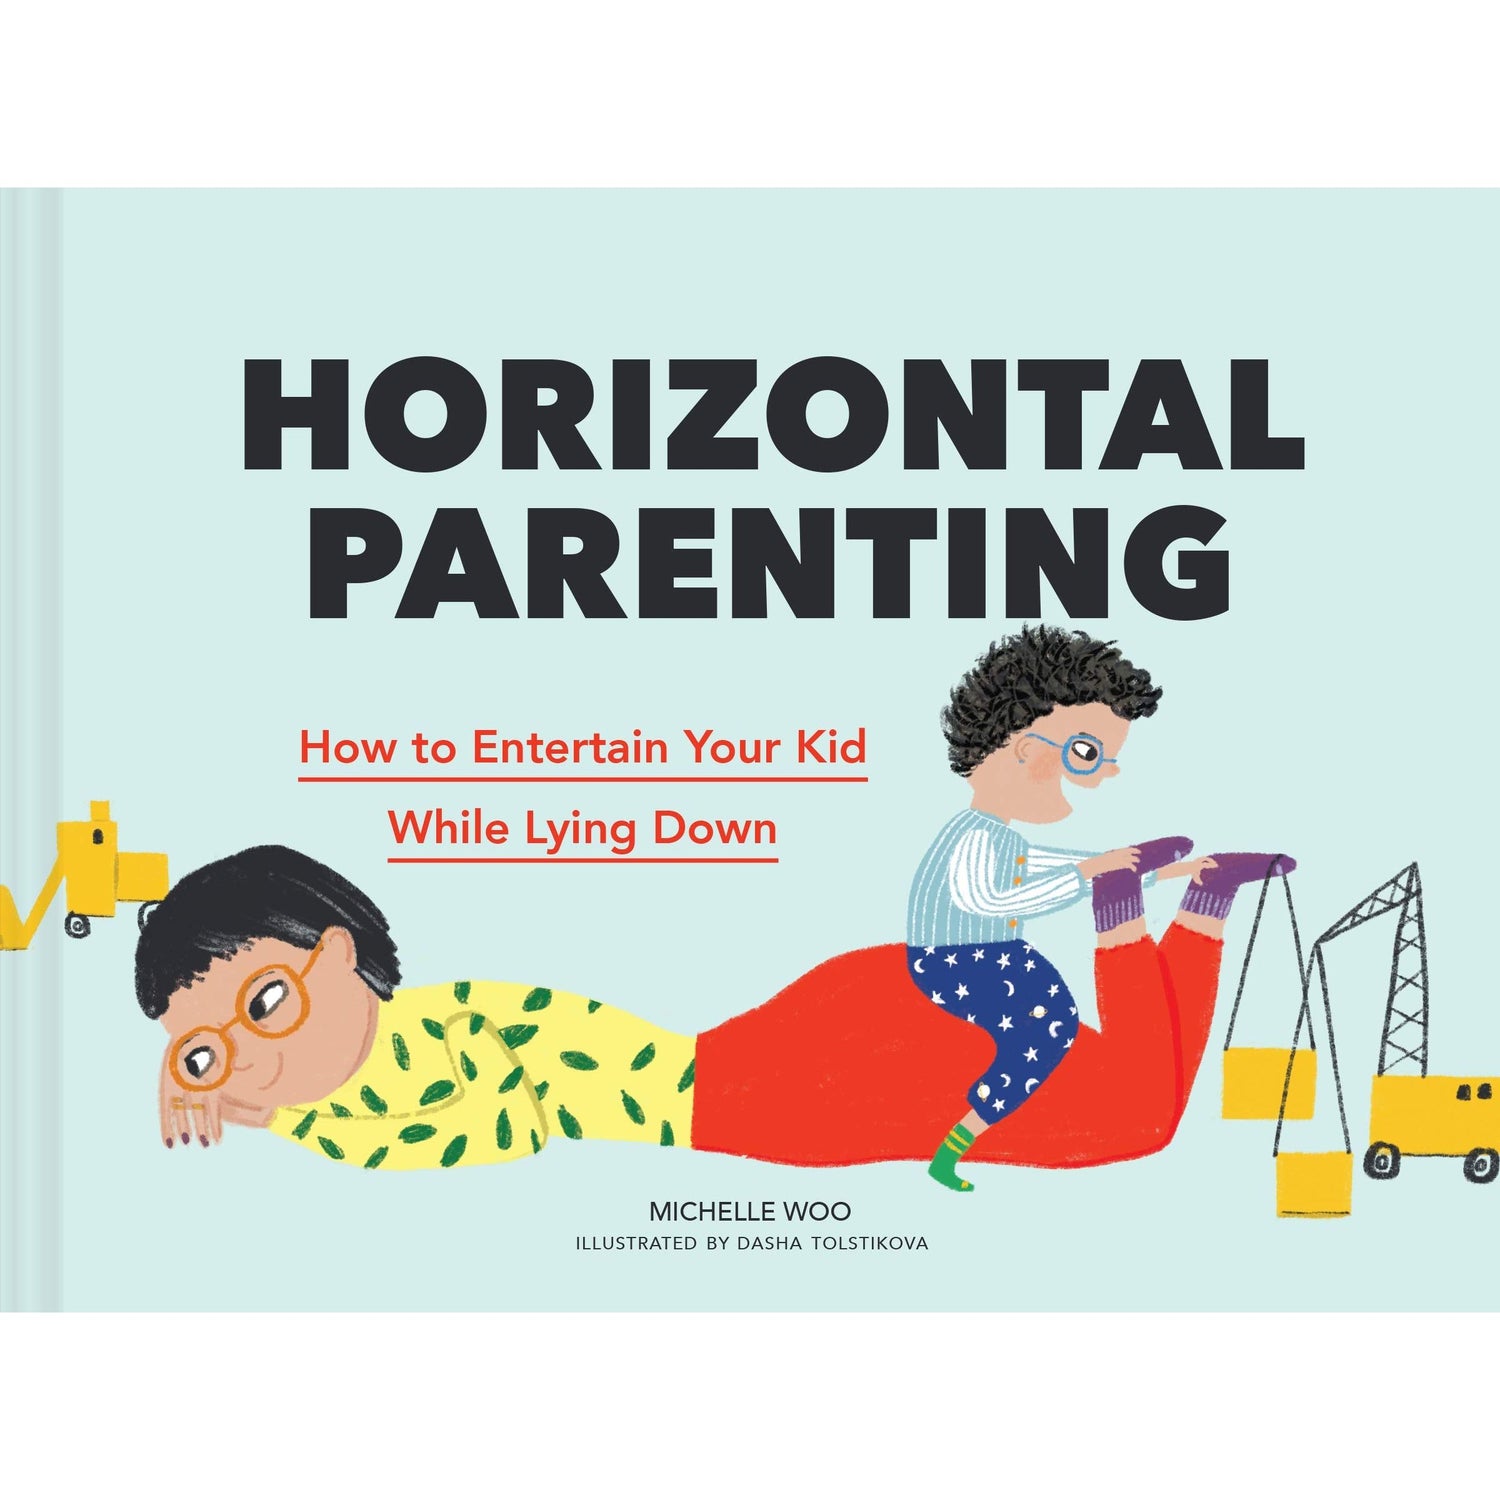 Horizontal Parenting - How to Entertain Your Kid While Laying Down